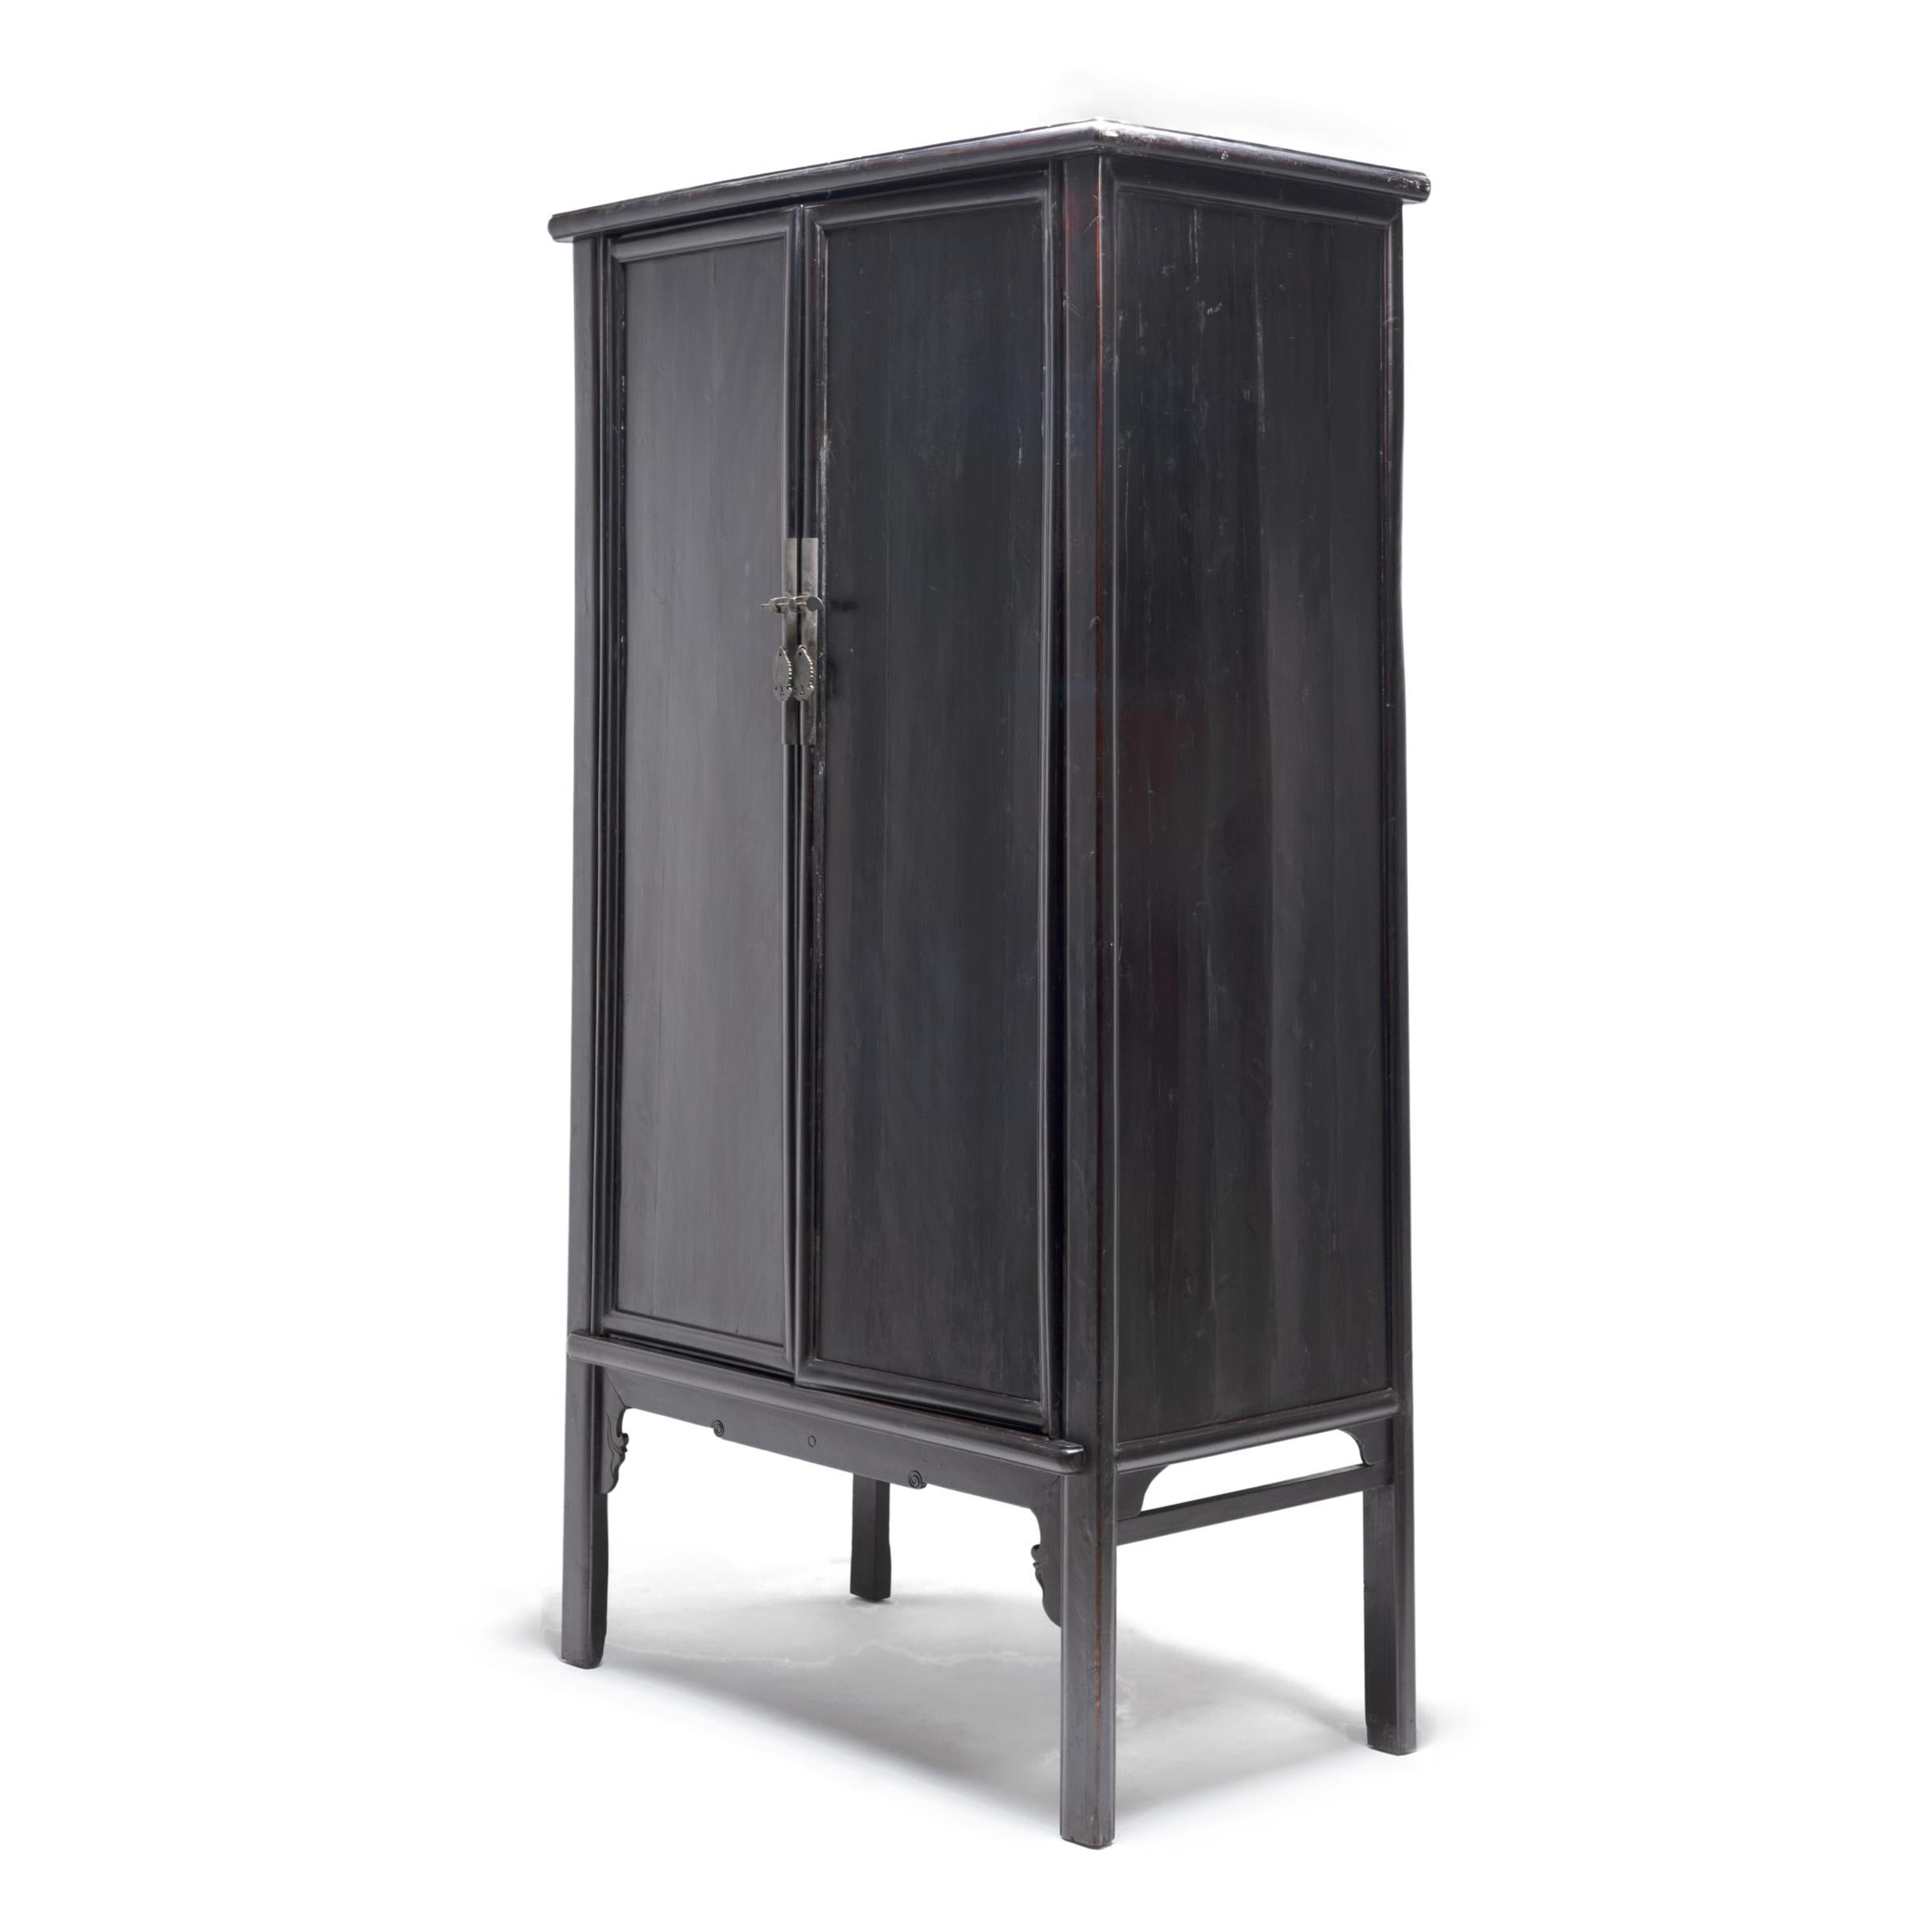 Qing Chinese Black Lacquer Scholar's Cabinet, c. 1850